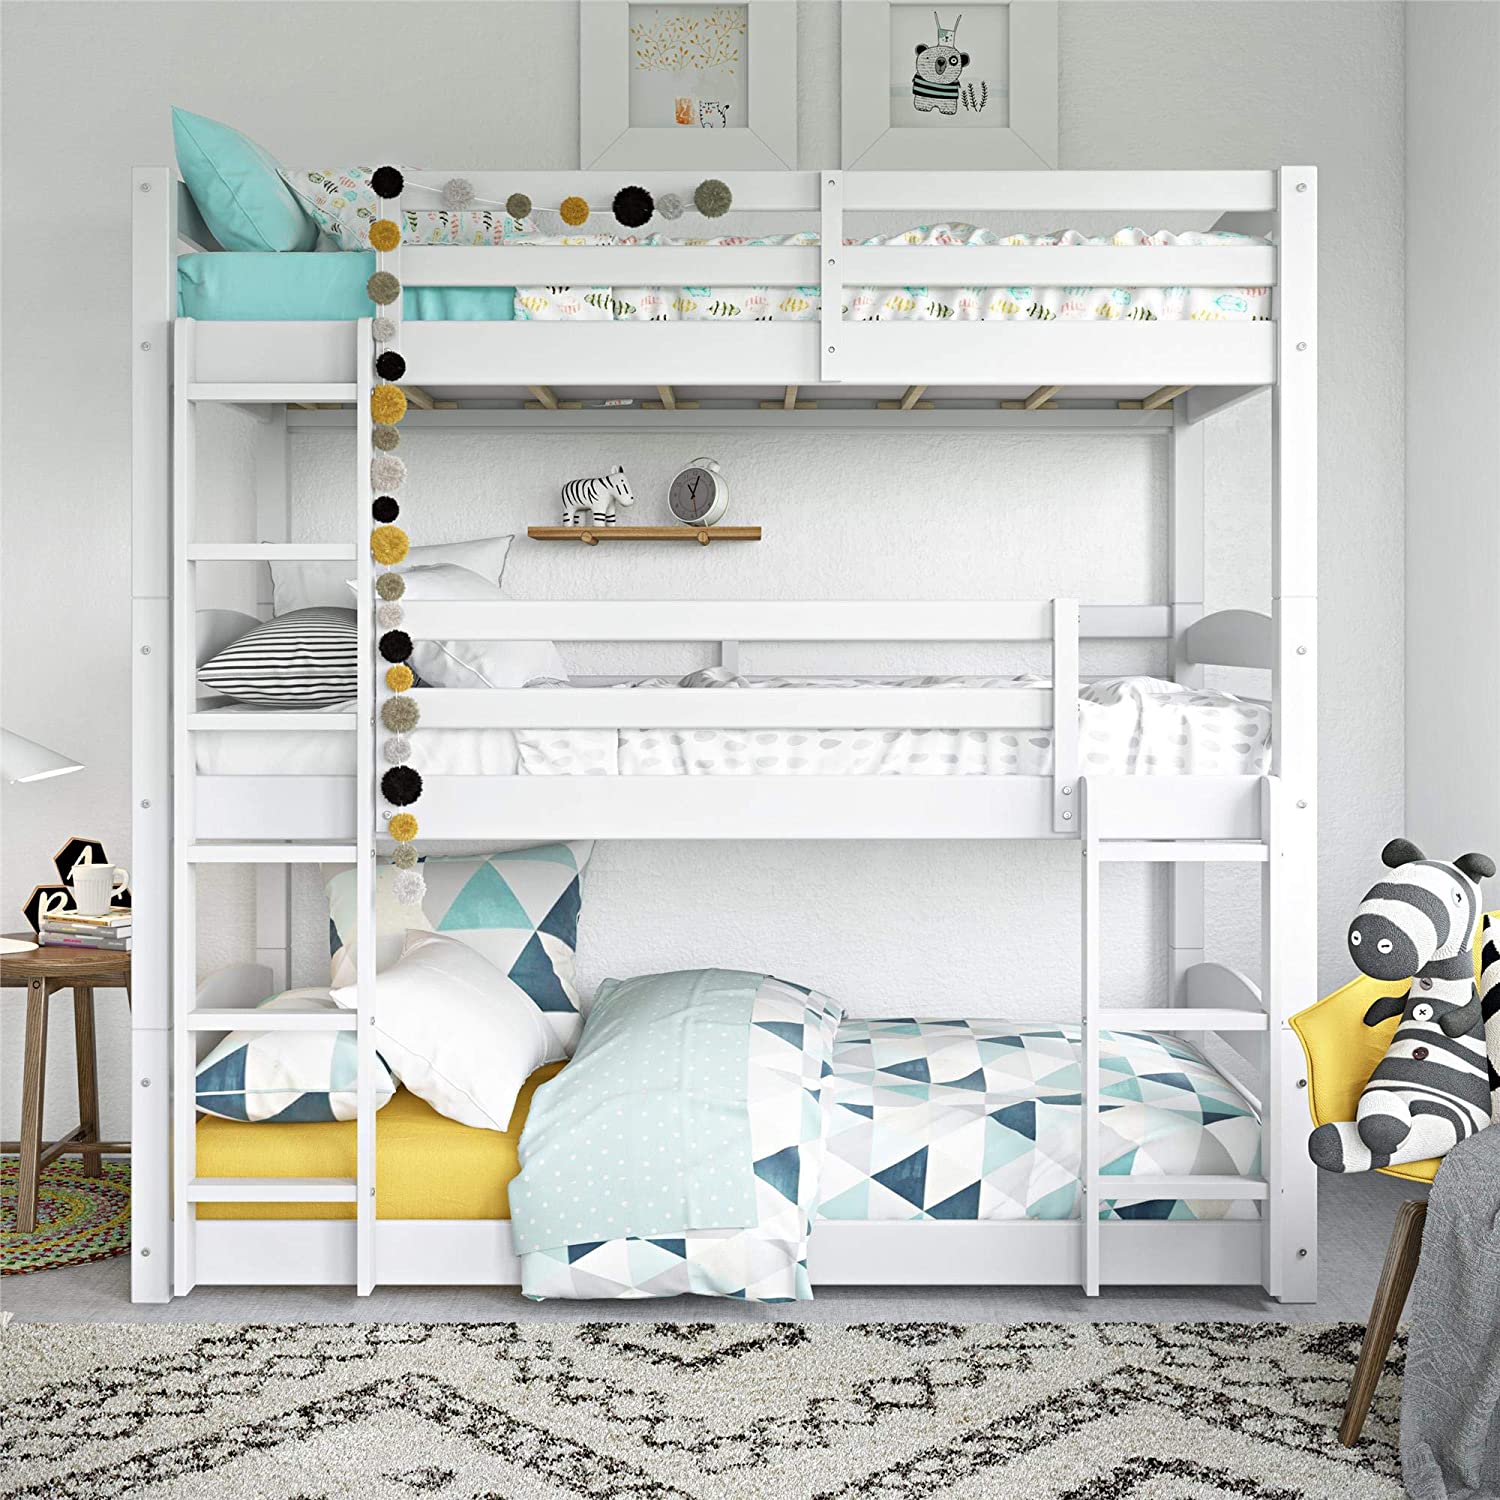 26 Bunk Beds You Ll Want For Yourself, Fun Kids Bunk Beds